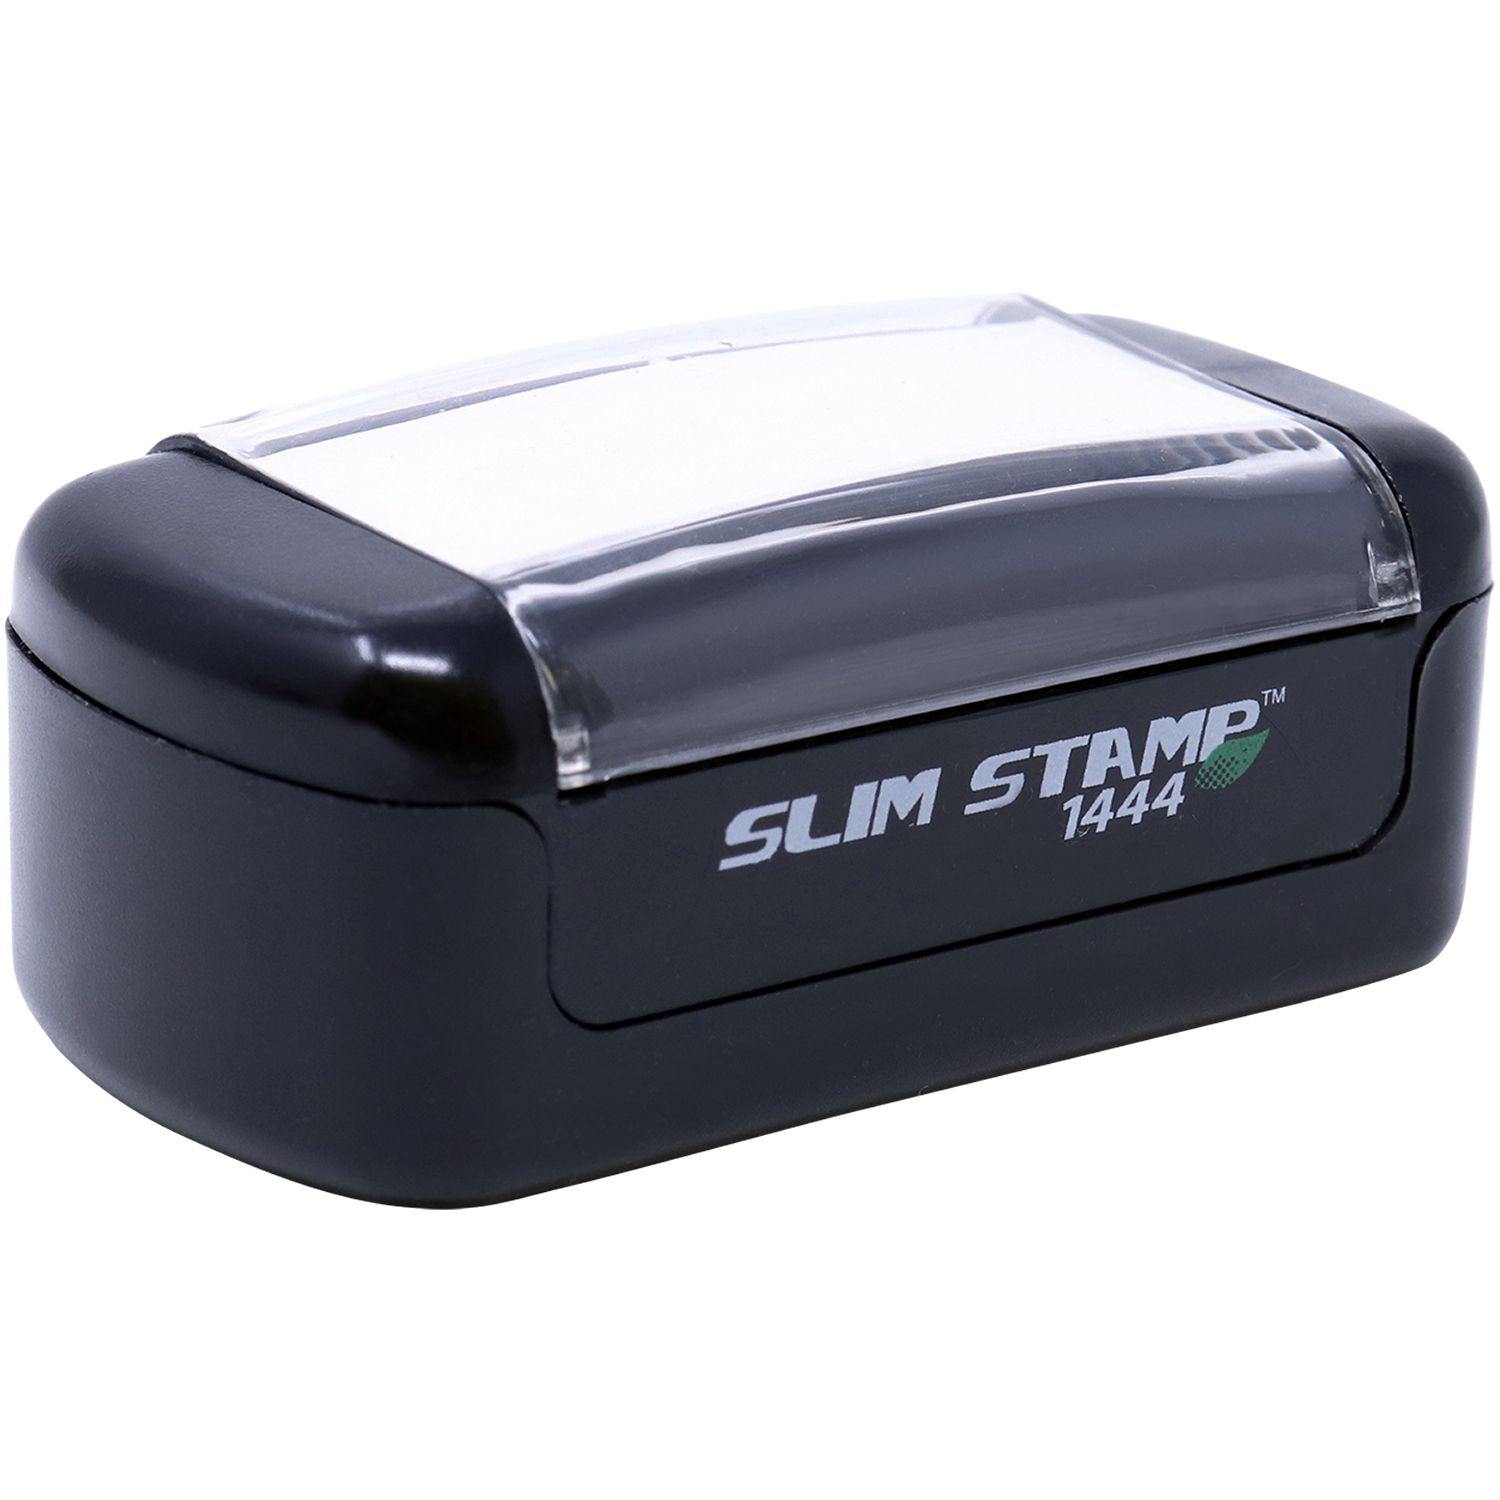 Alt View of Slim Pre-Inked Global Air Letter Post Stamp Mount Angle